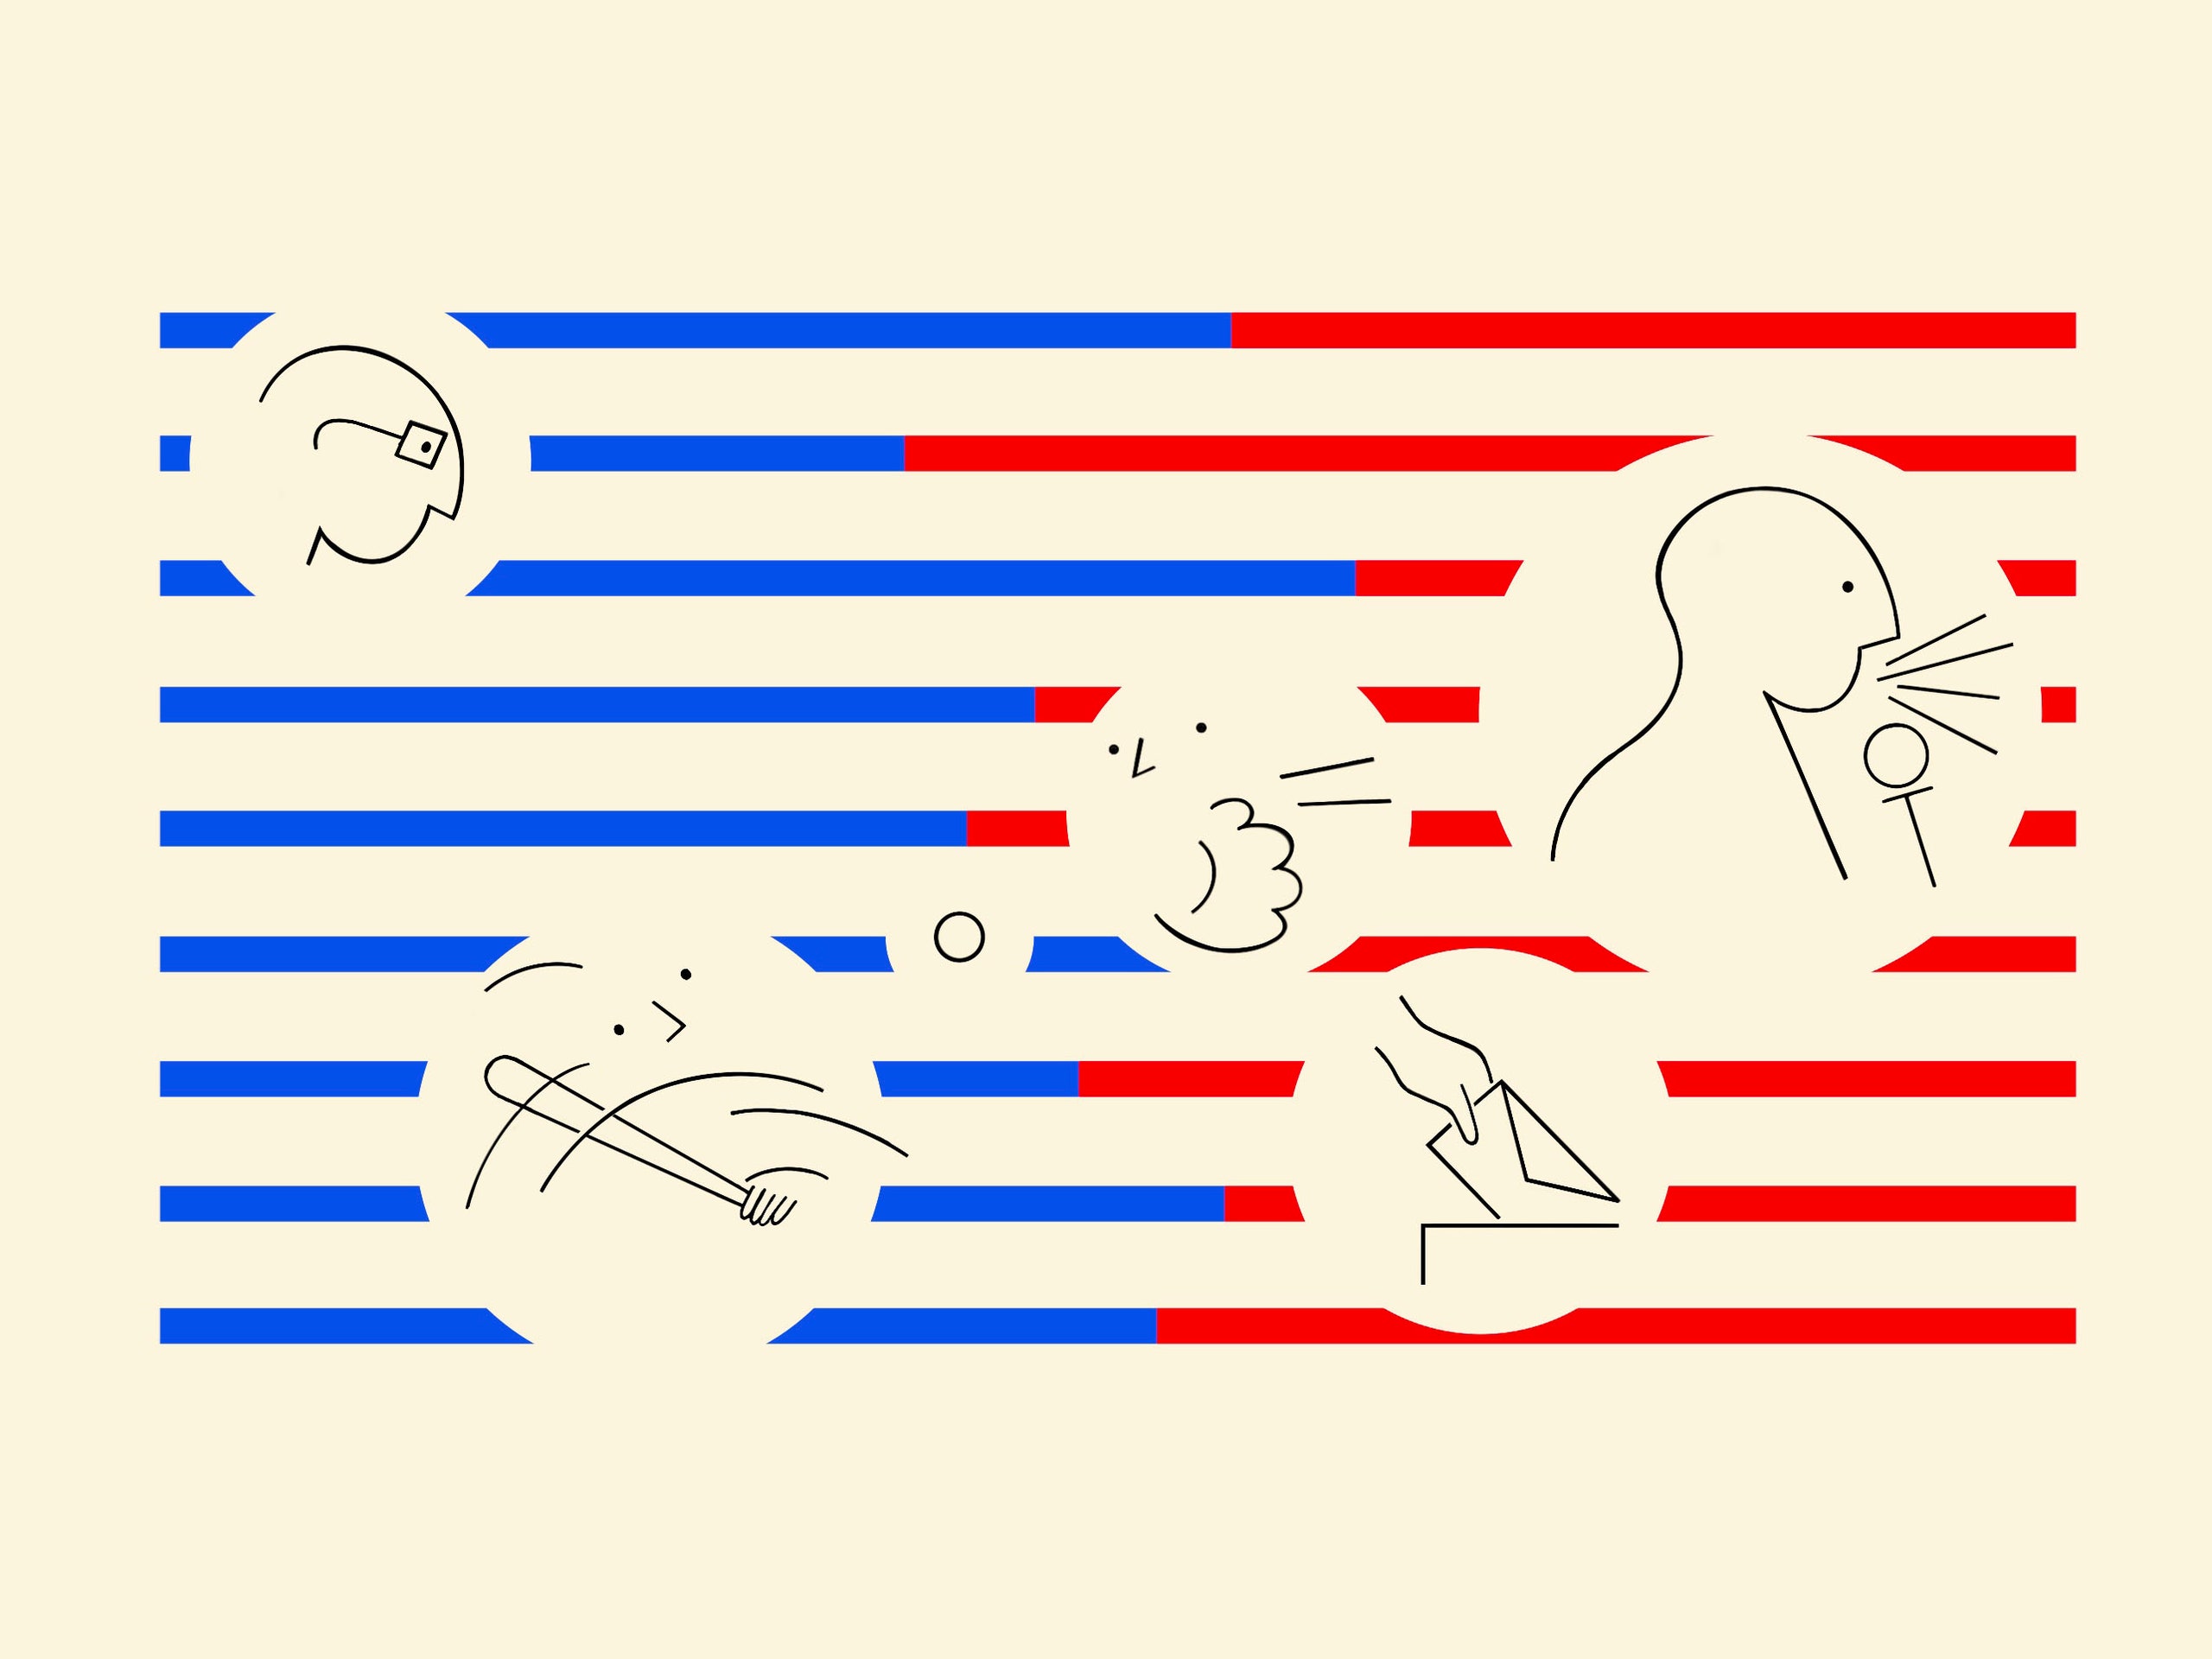 An illustration depicts blueandred lines with outlines of peoples heads interspersed.